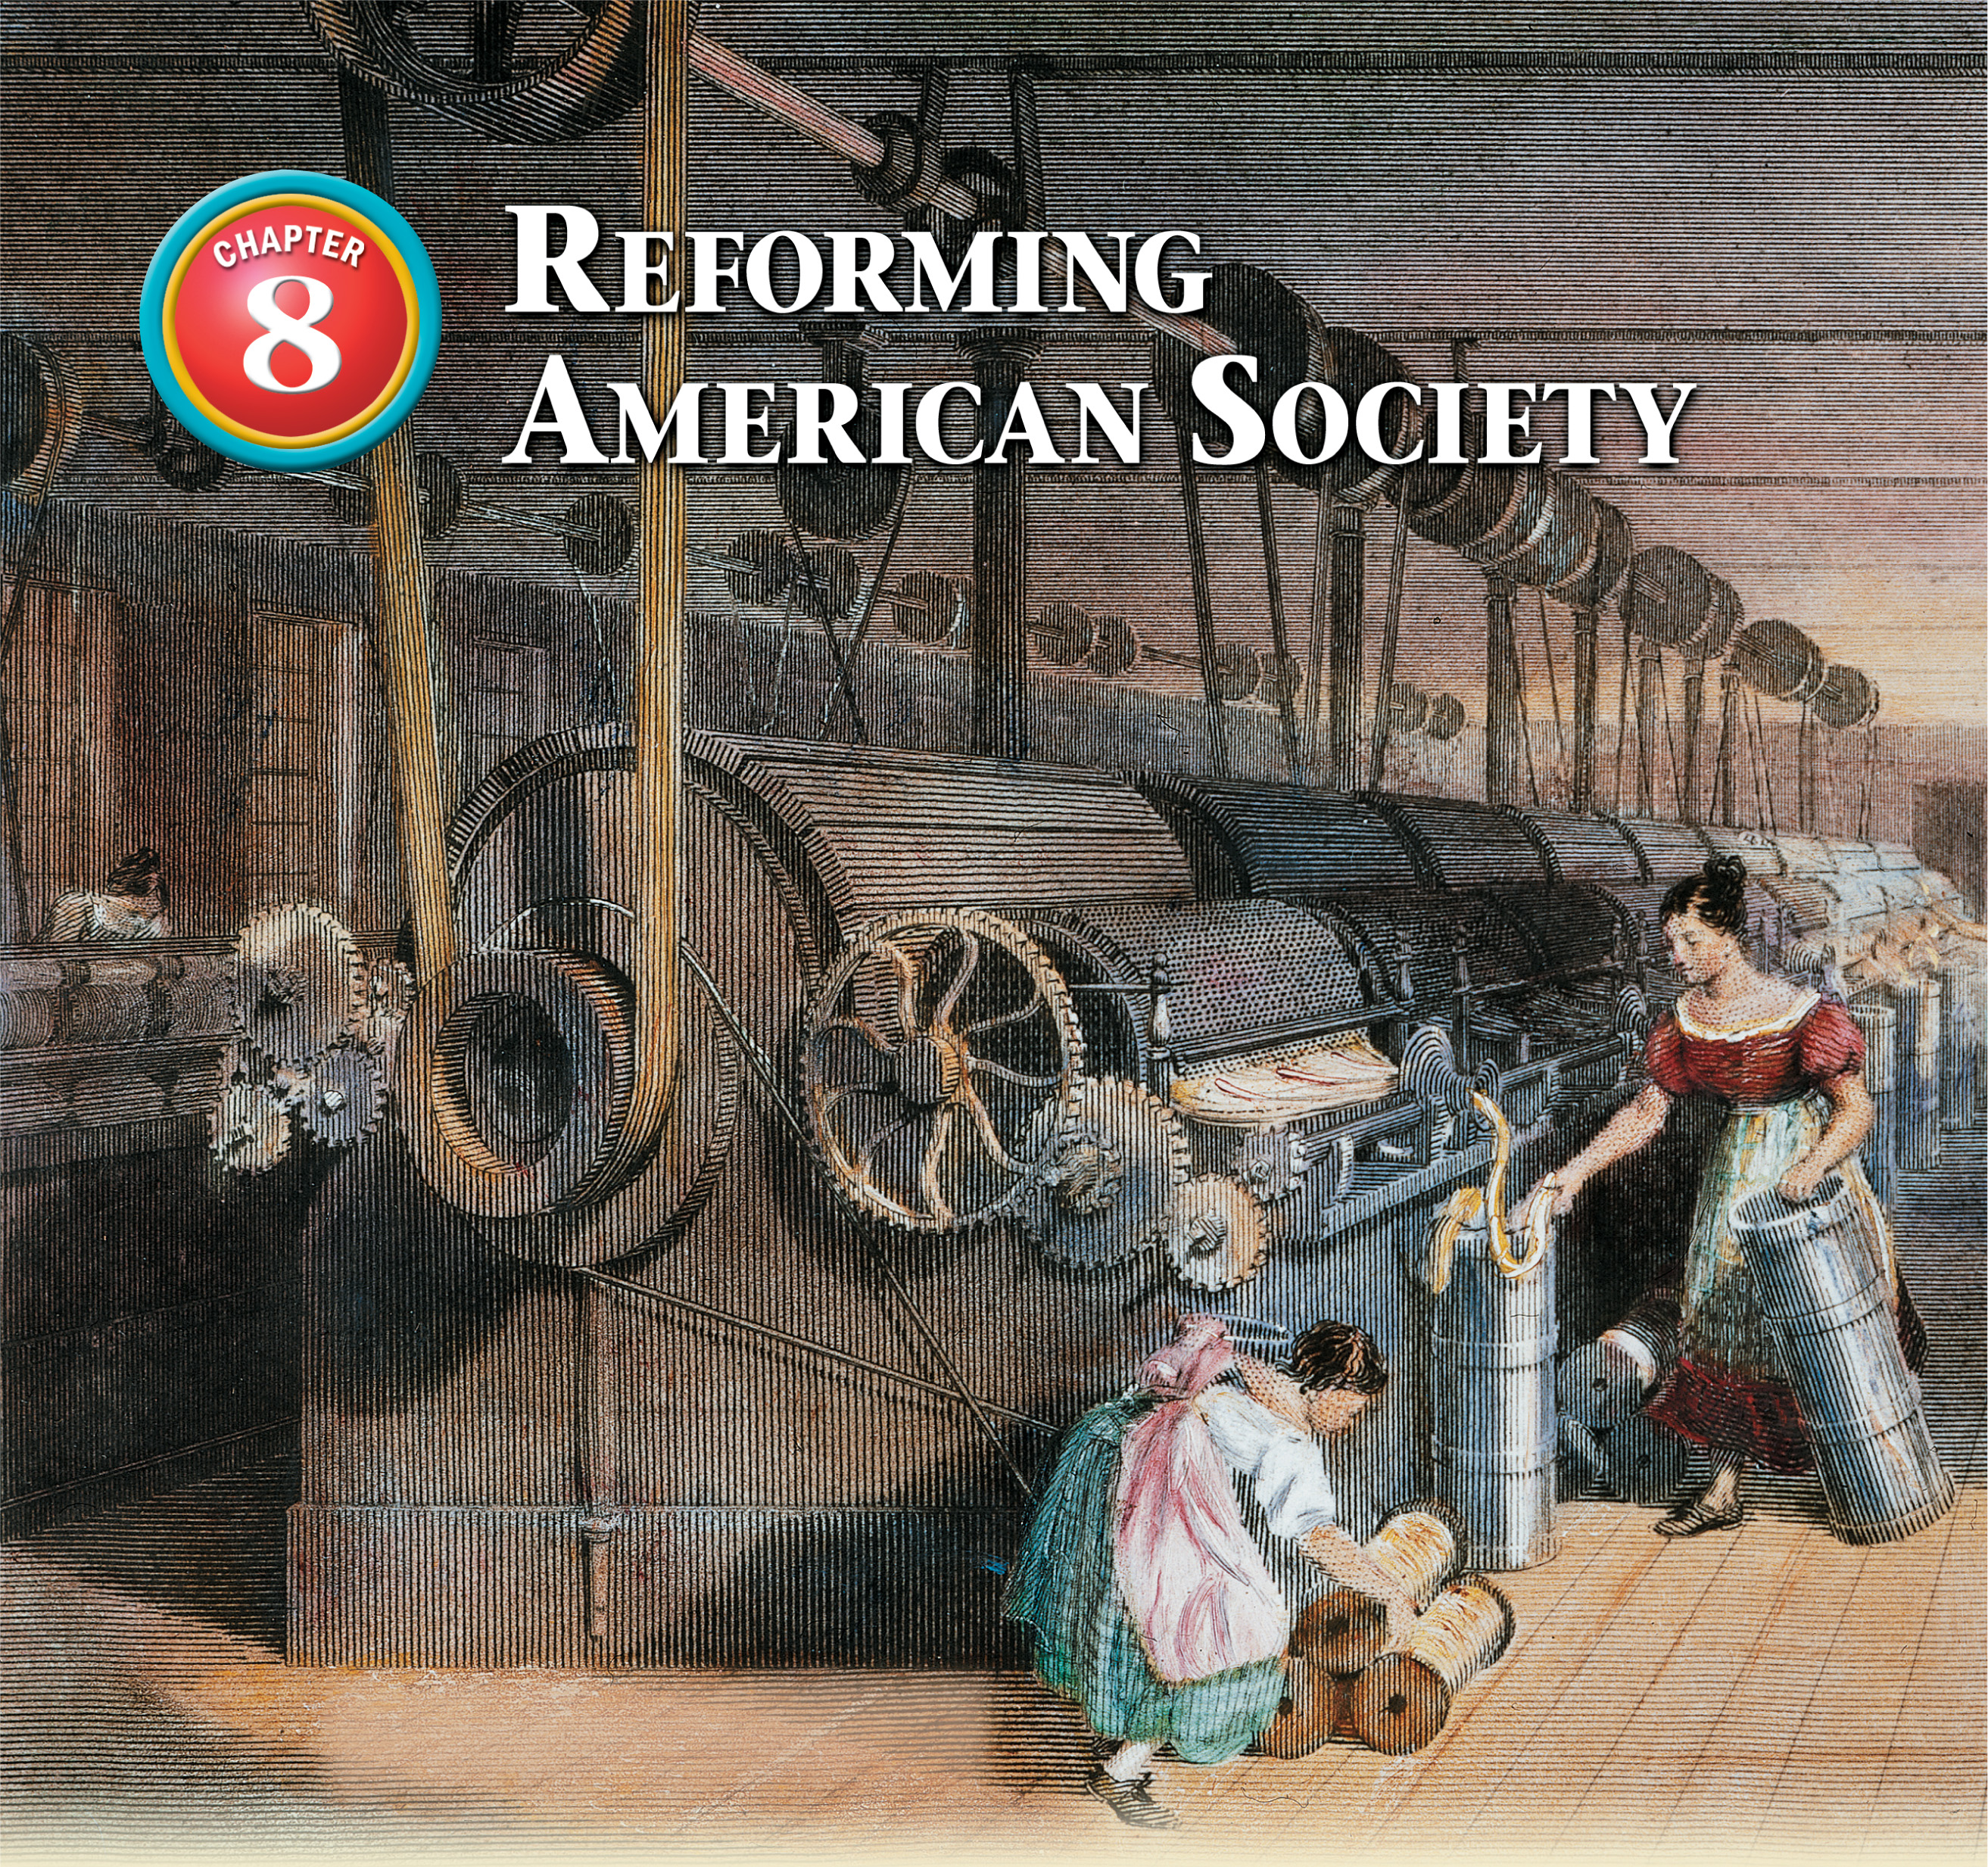 In
an engraving, a woman and a girl work in a factory. A huge machine with jagged gears cranks out
cloth. A title: Chapter 8, Reforming American Society.